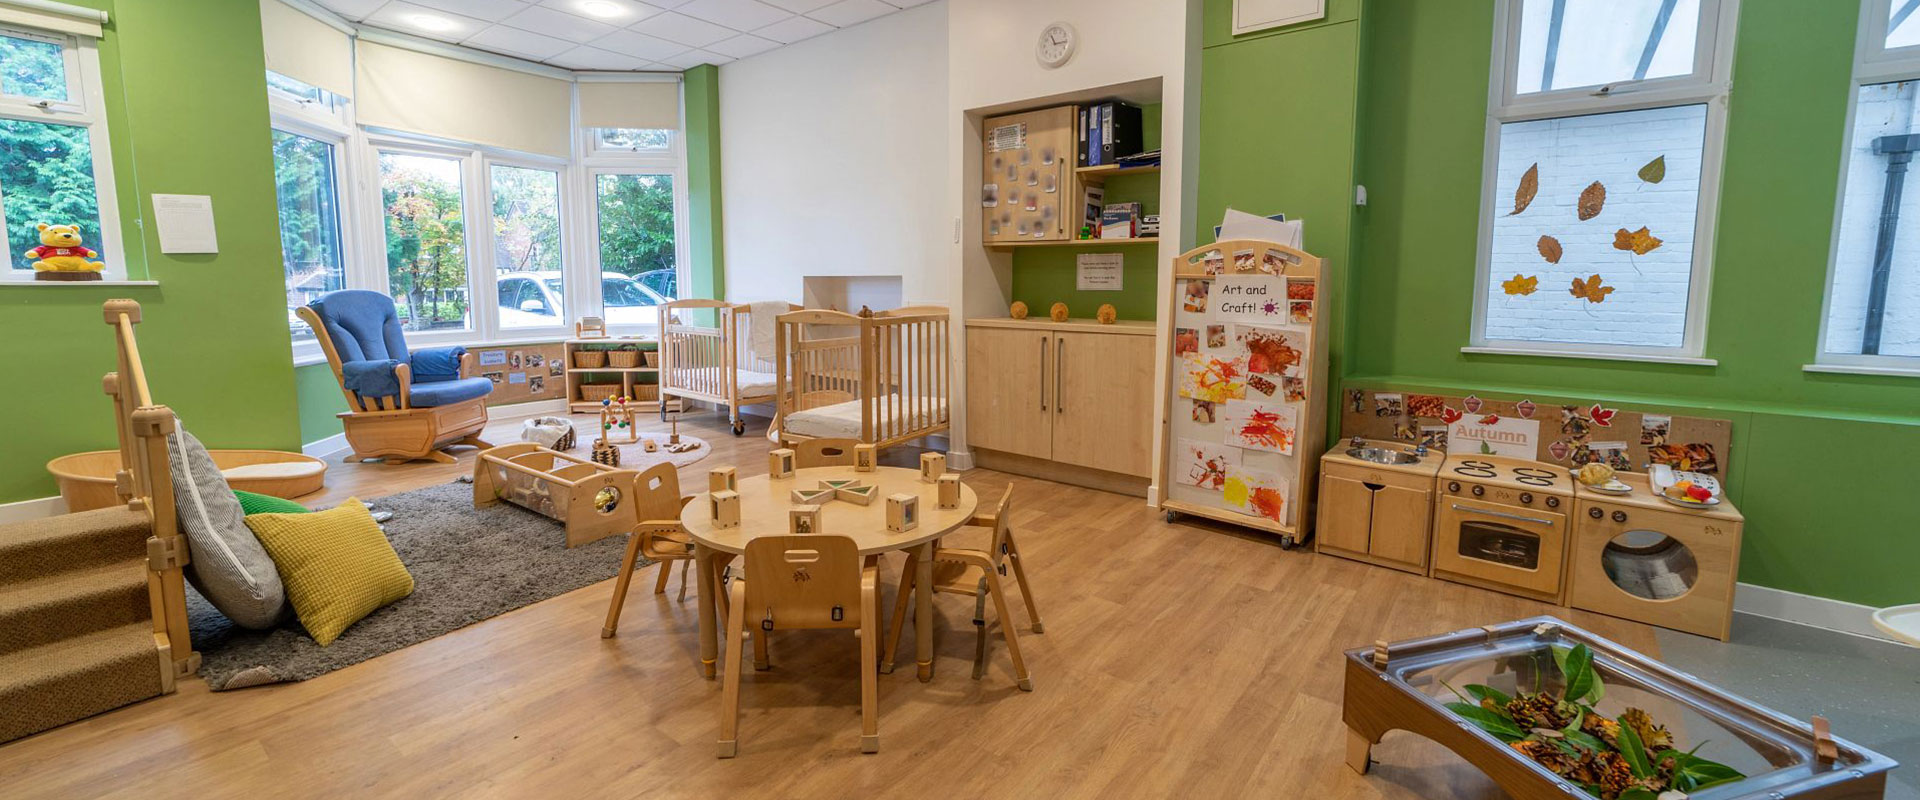 Solihull Day Nursery and Preschool toddlers 